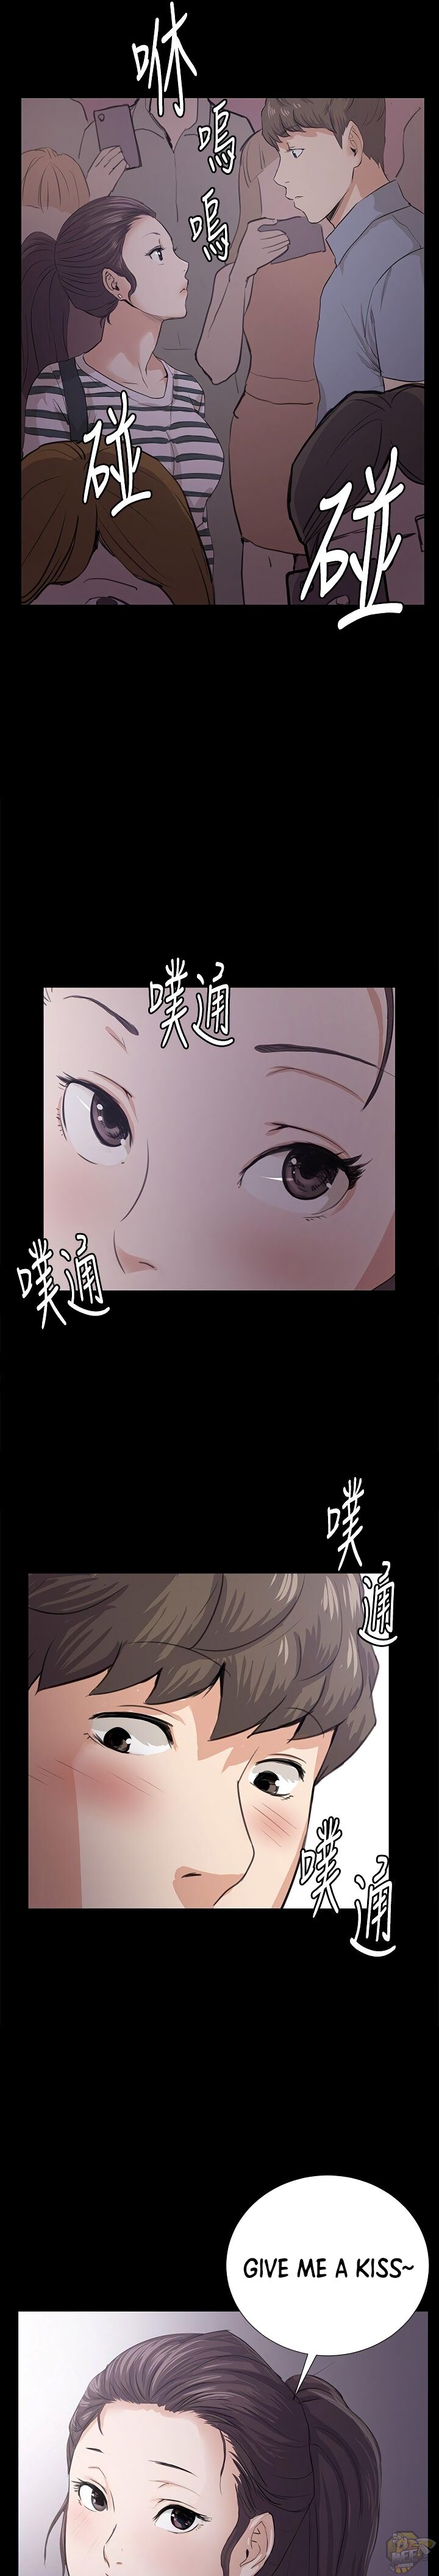 She’s too much for Me Chapter 57 - HolyManga.net